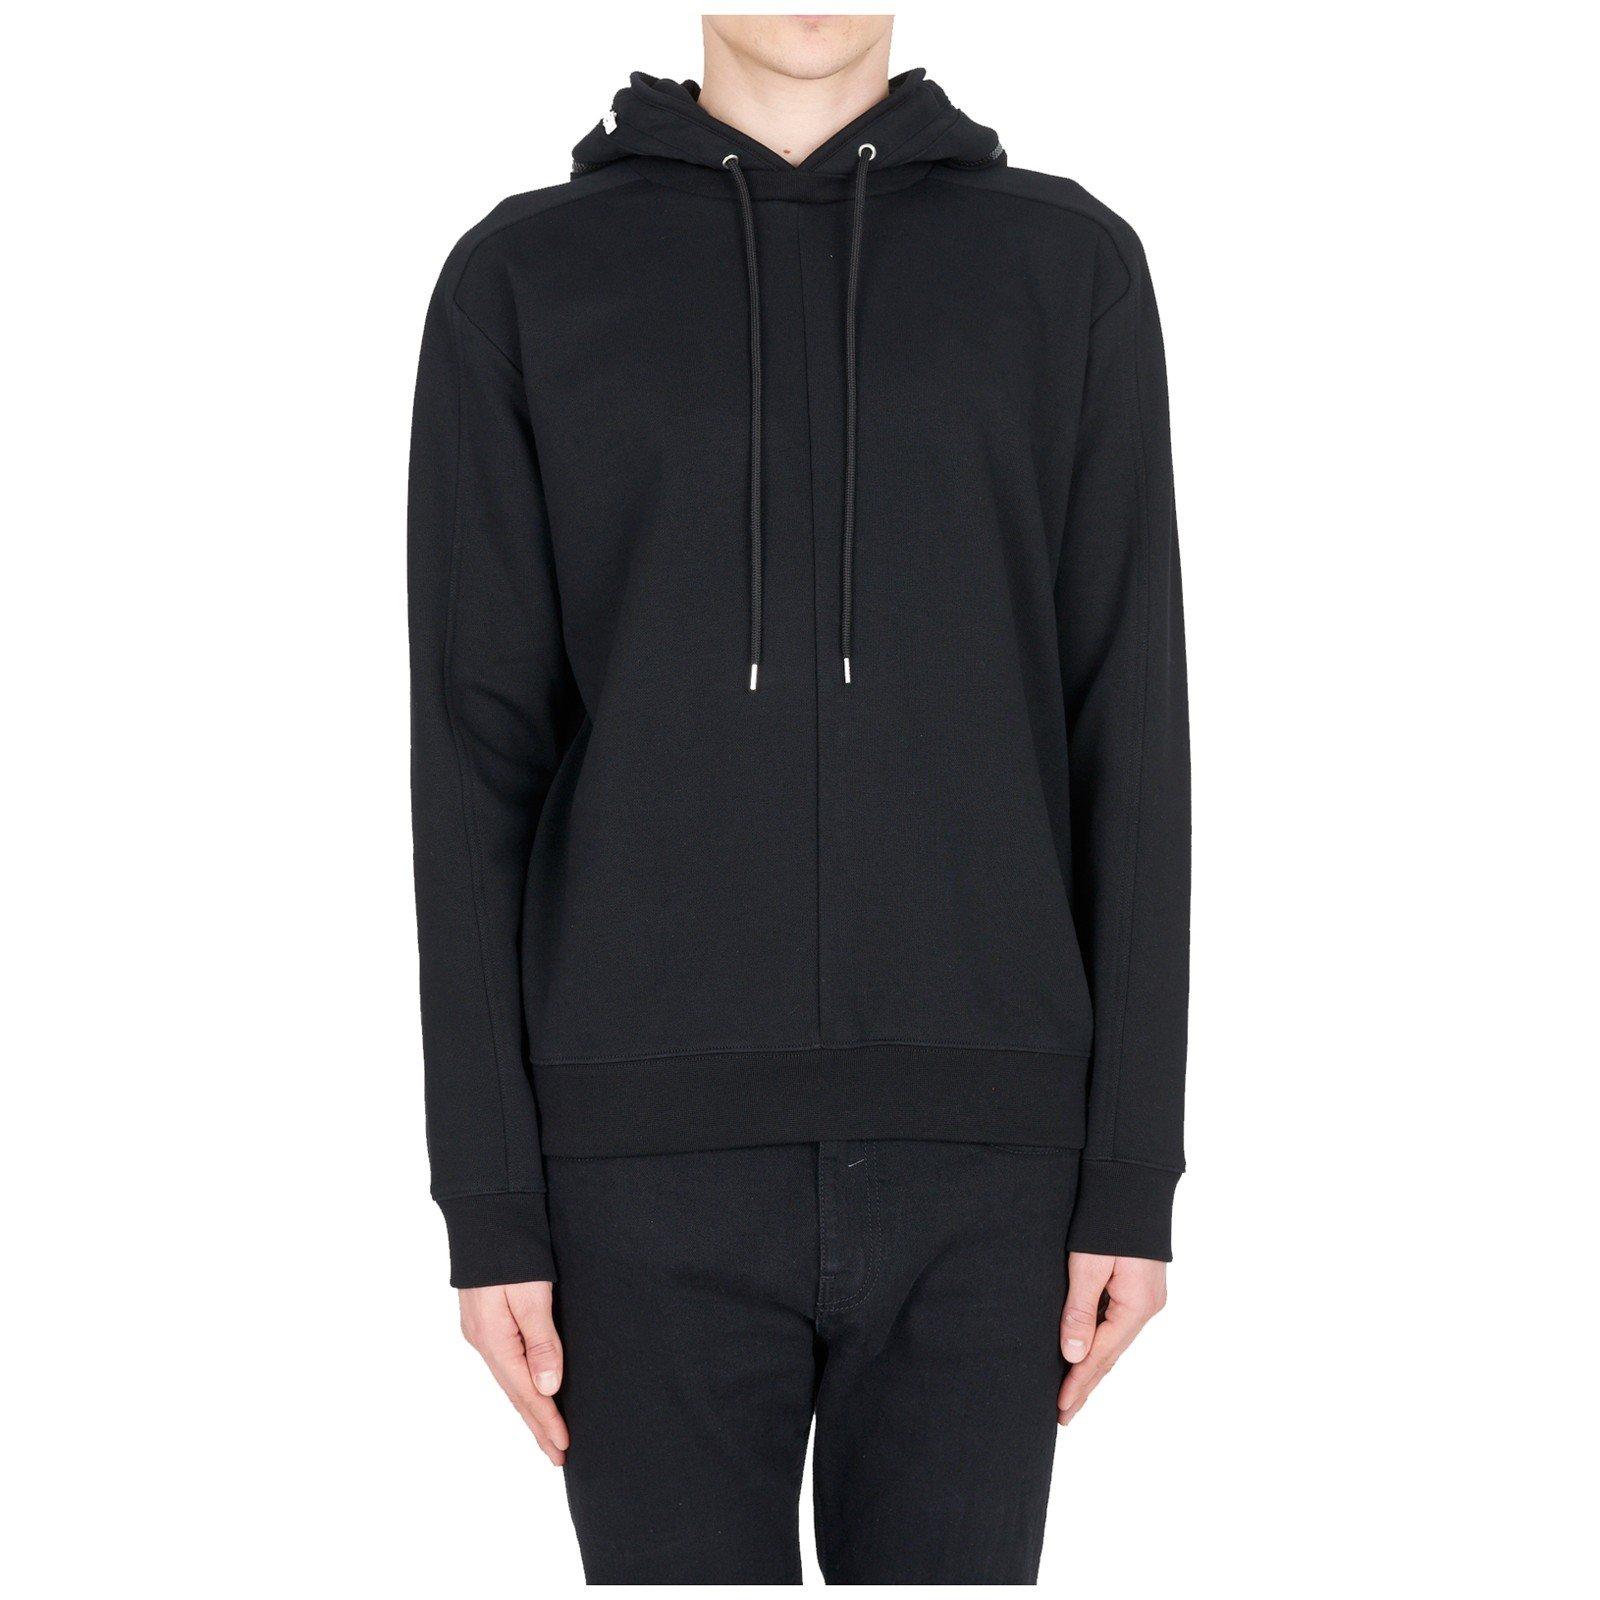 McQ Cotton Drawstring Hoodie in Black for Men - Save 12% - Lyst